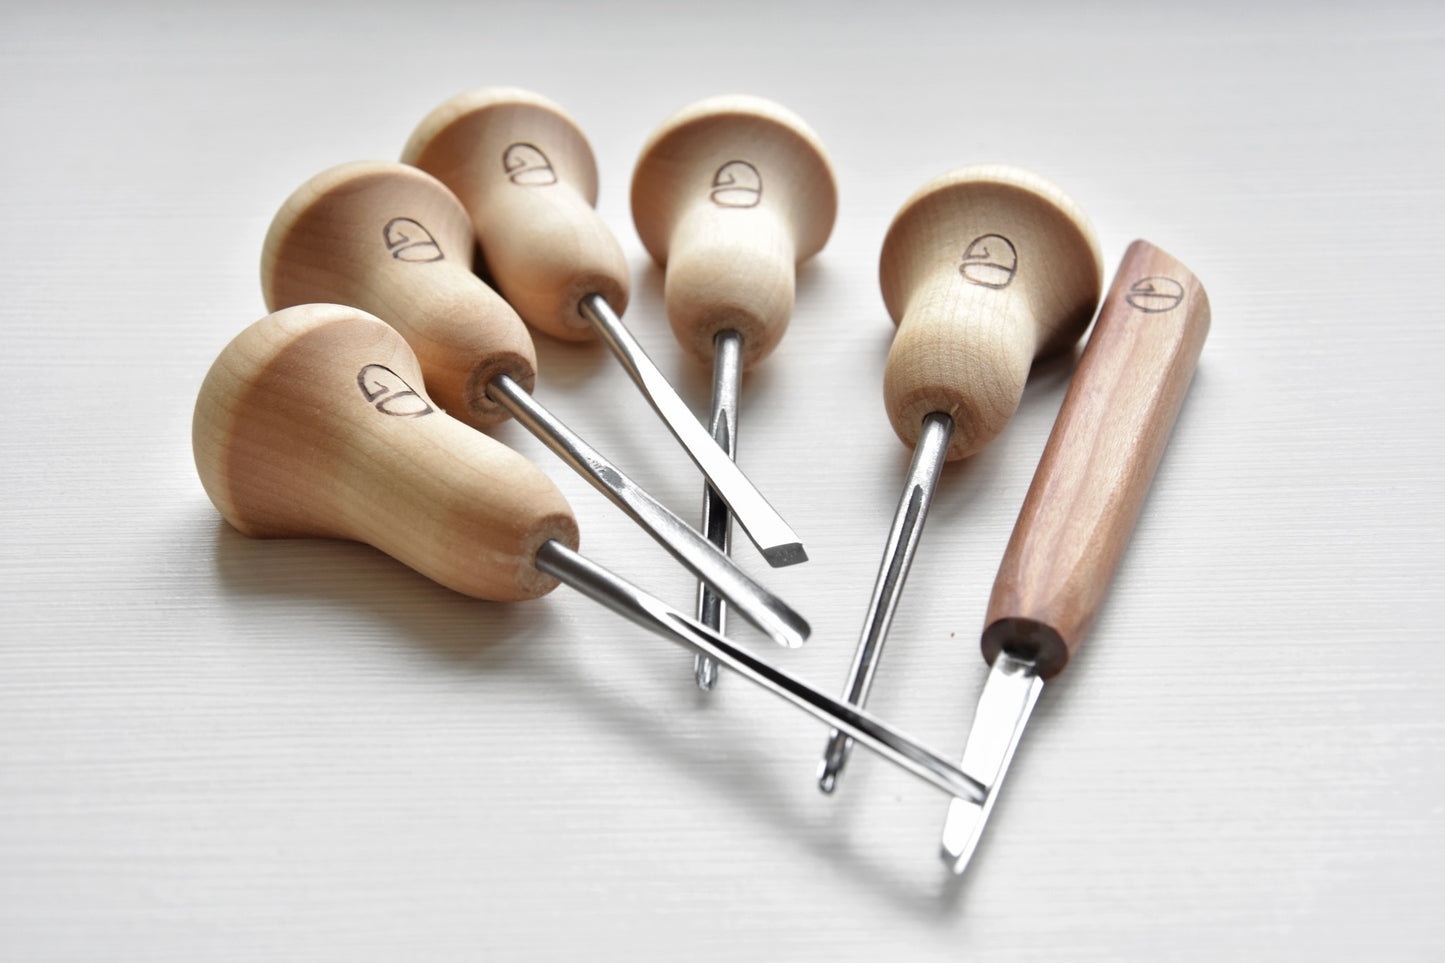 6 piece wood carving palm tools